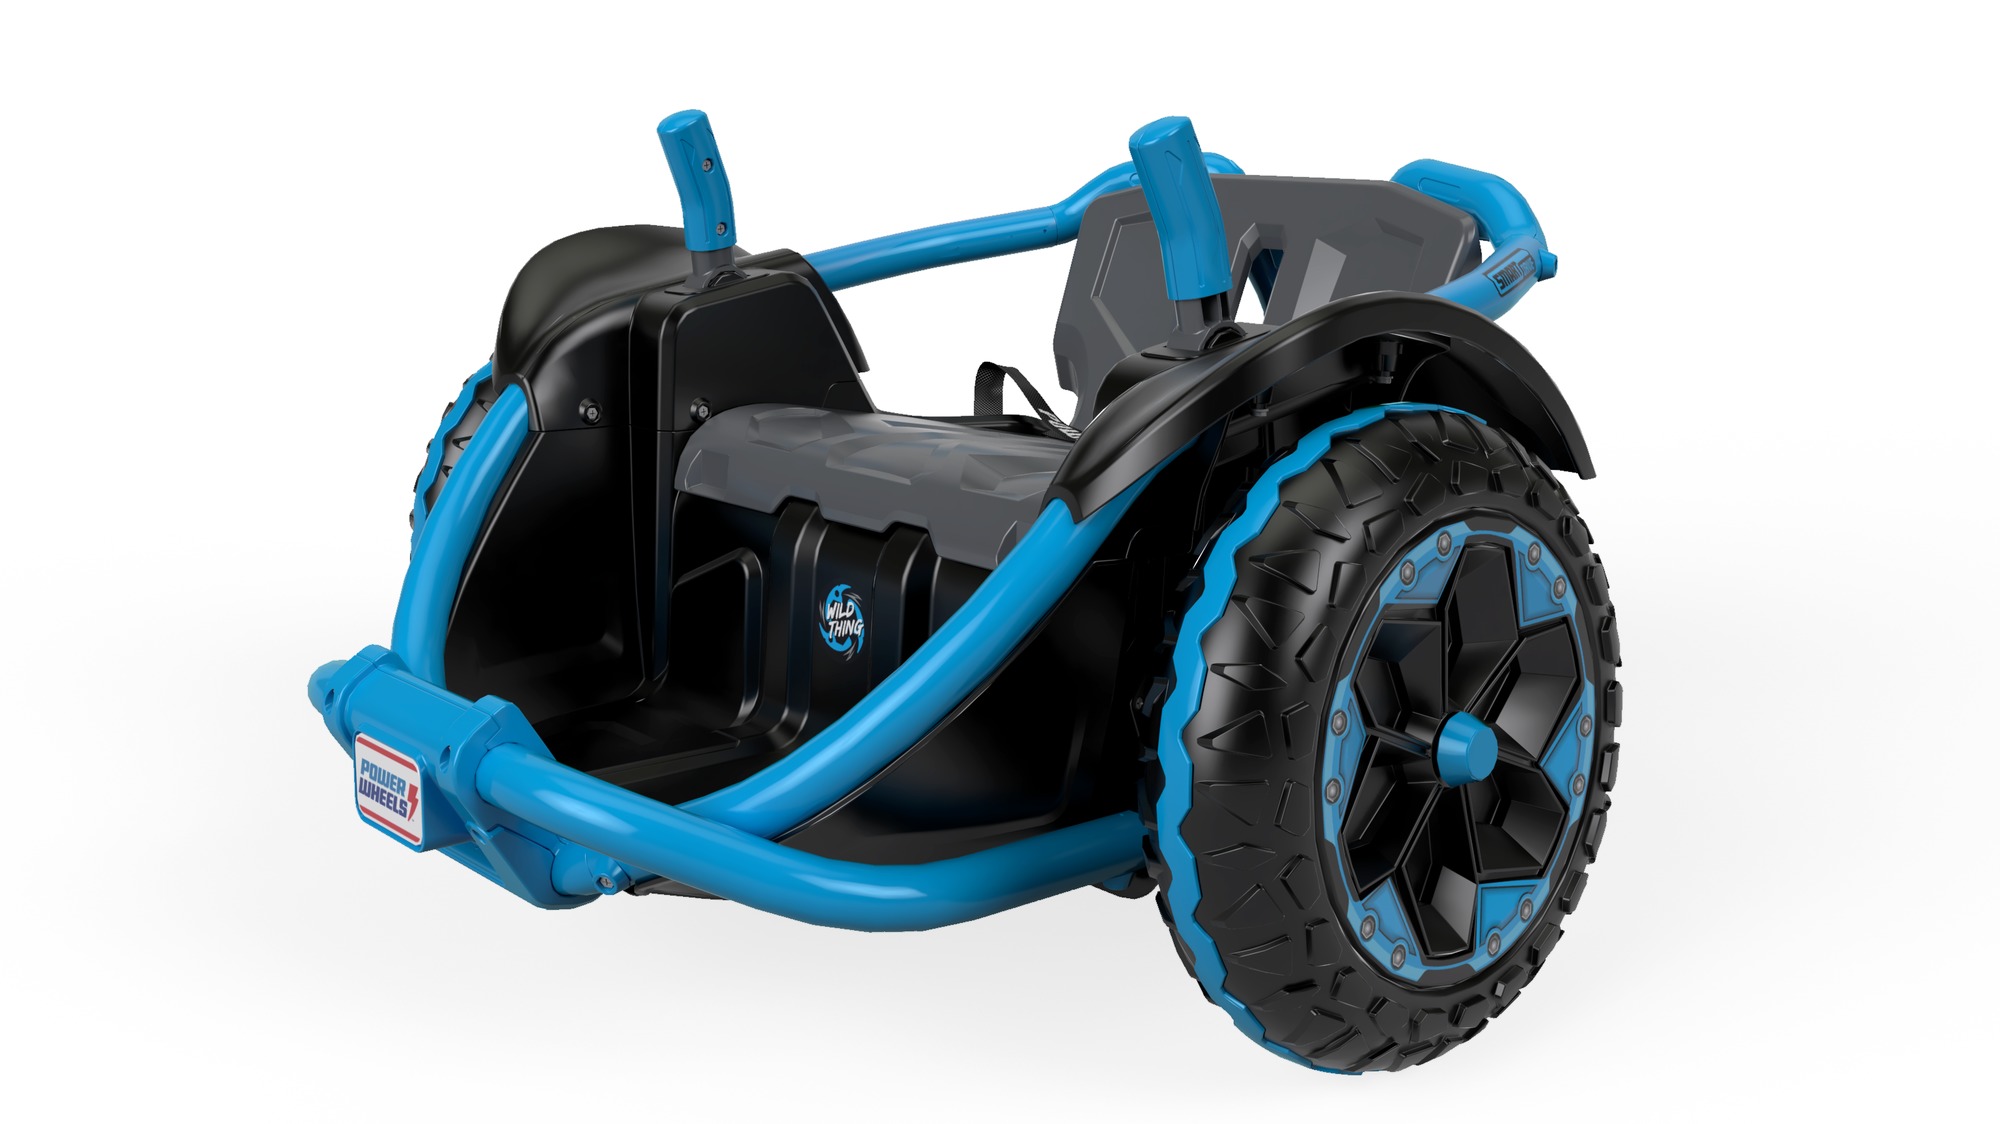 Power Wheels Wild Thing 360 Spinning Ride-On Vehicle, Blue, 12V - image 4 of 10